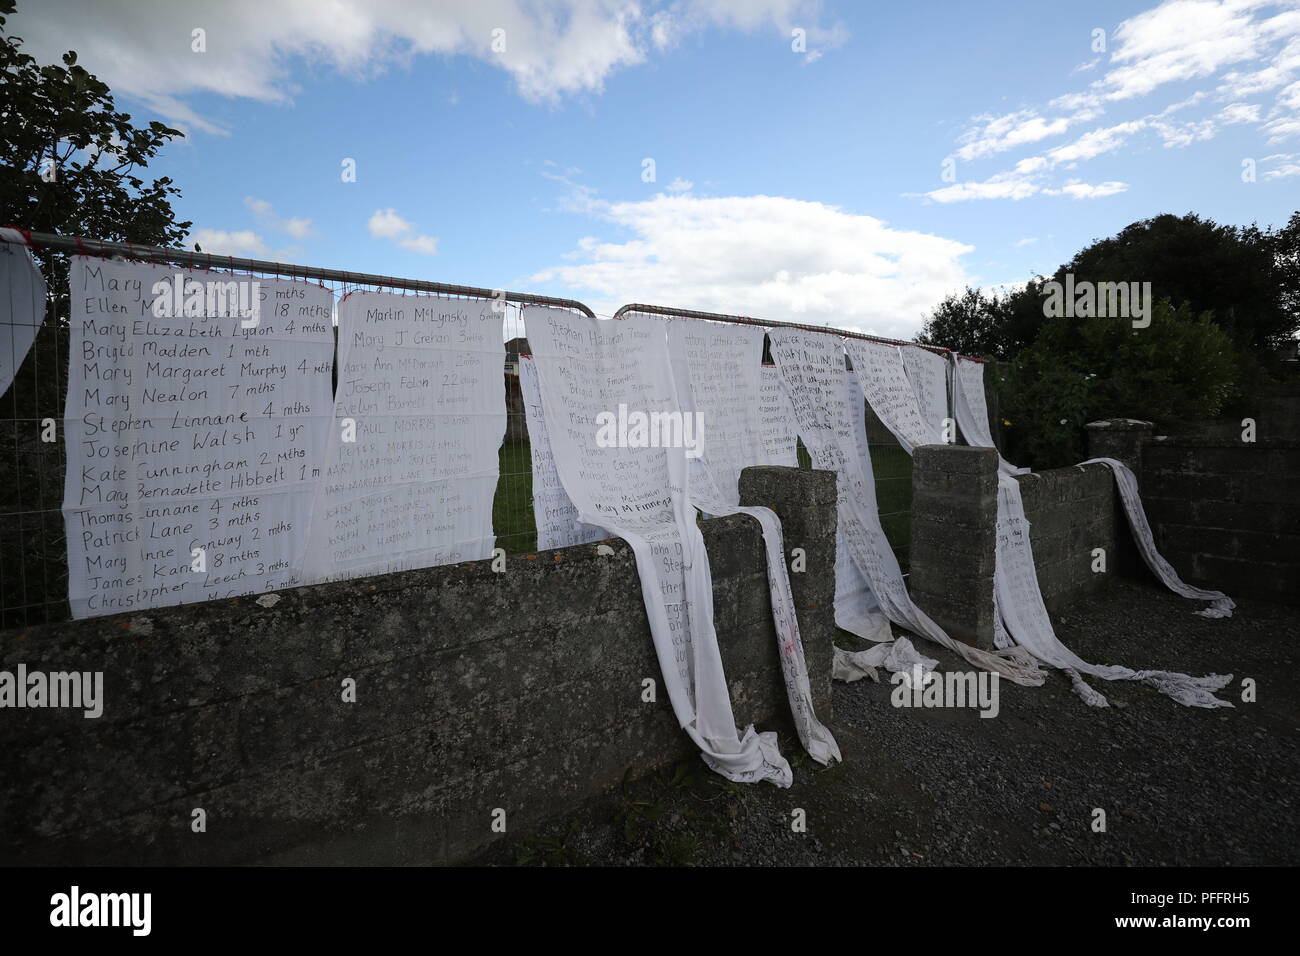 Hotel bed sheets with the names of hundreds of dead children draped on the gates of a mass burial site at Tuam, Co Galway where a vigil will take place during the Pope's visit to Knock Shrine in Co Mayo. Stock Photo